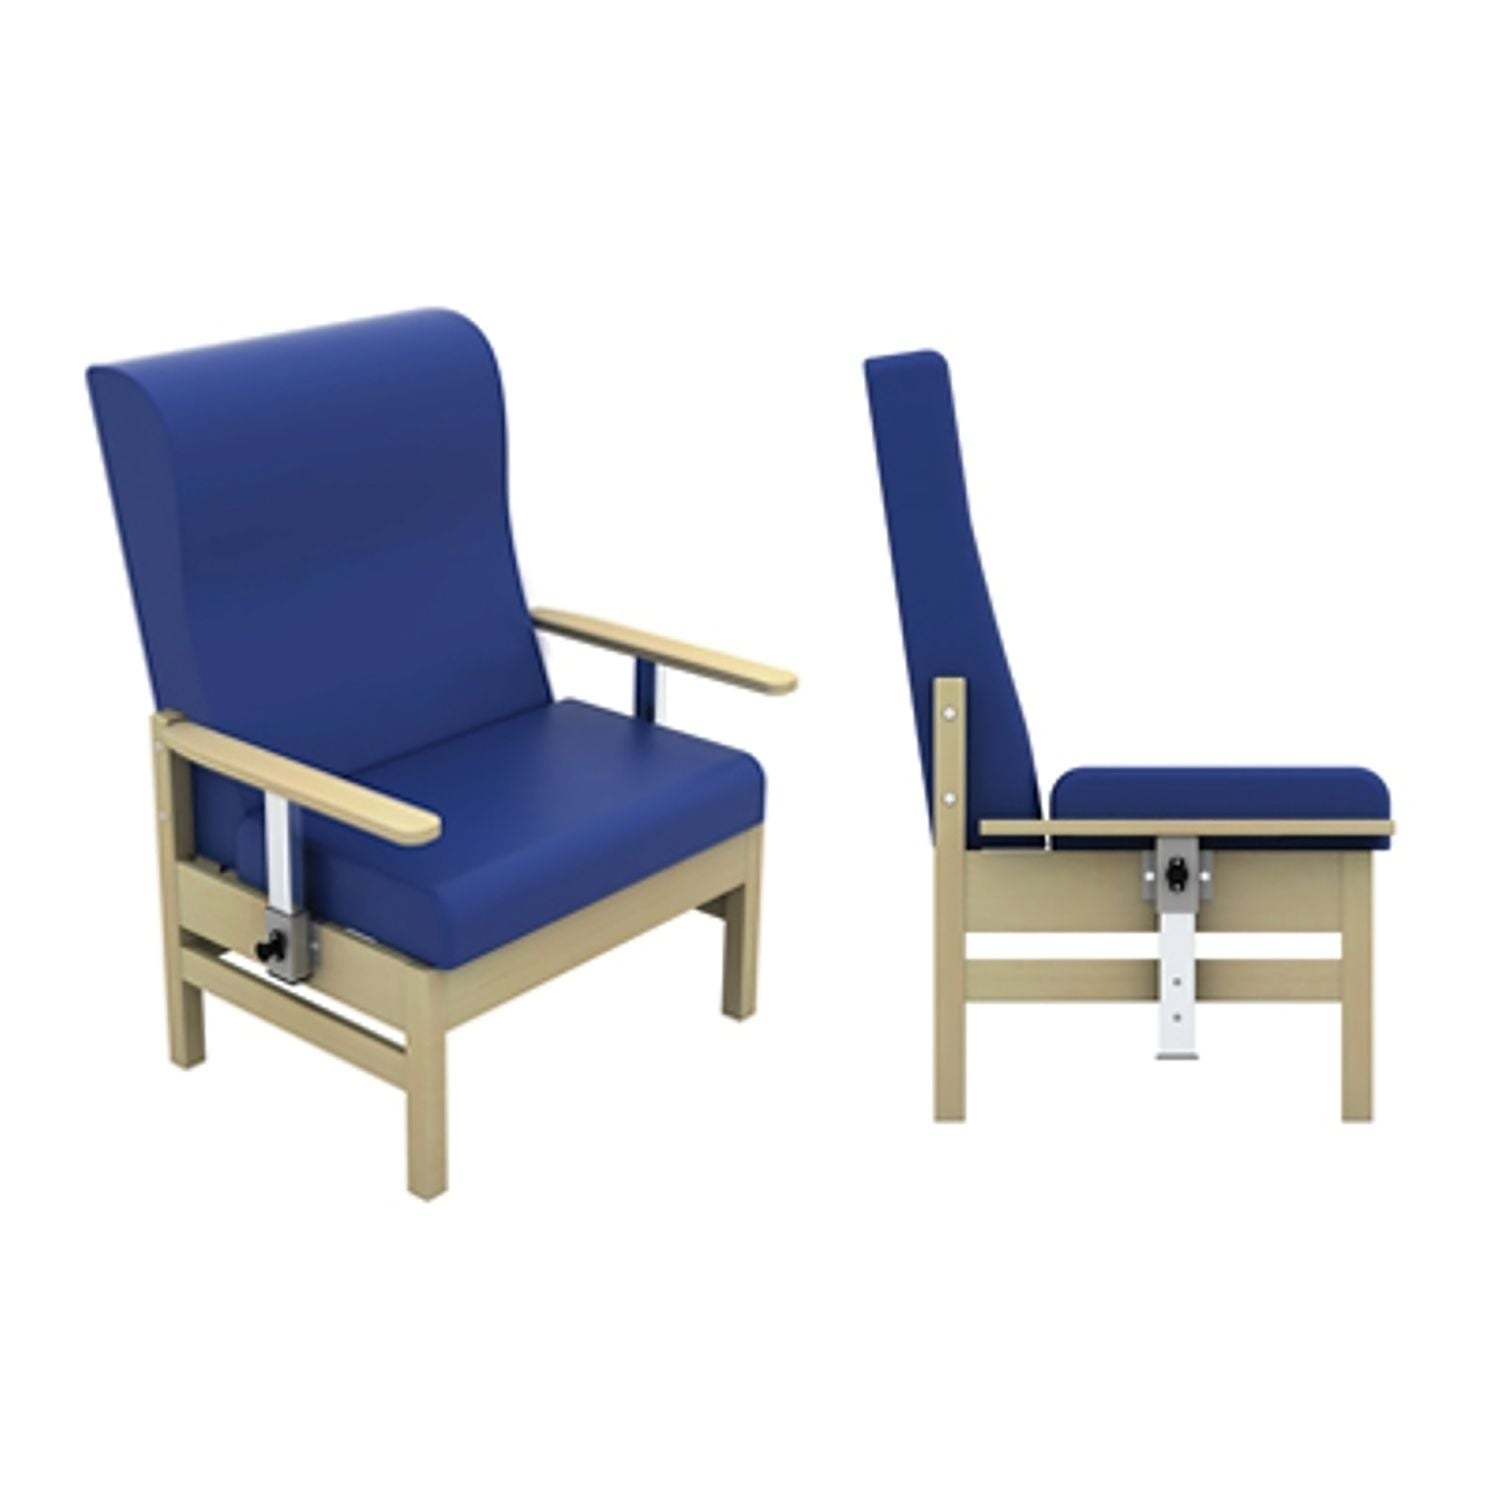 Bariatric Patient Armchair | High Back & Drop Arms | Intevene Anti-bacterial Upholstery